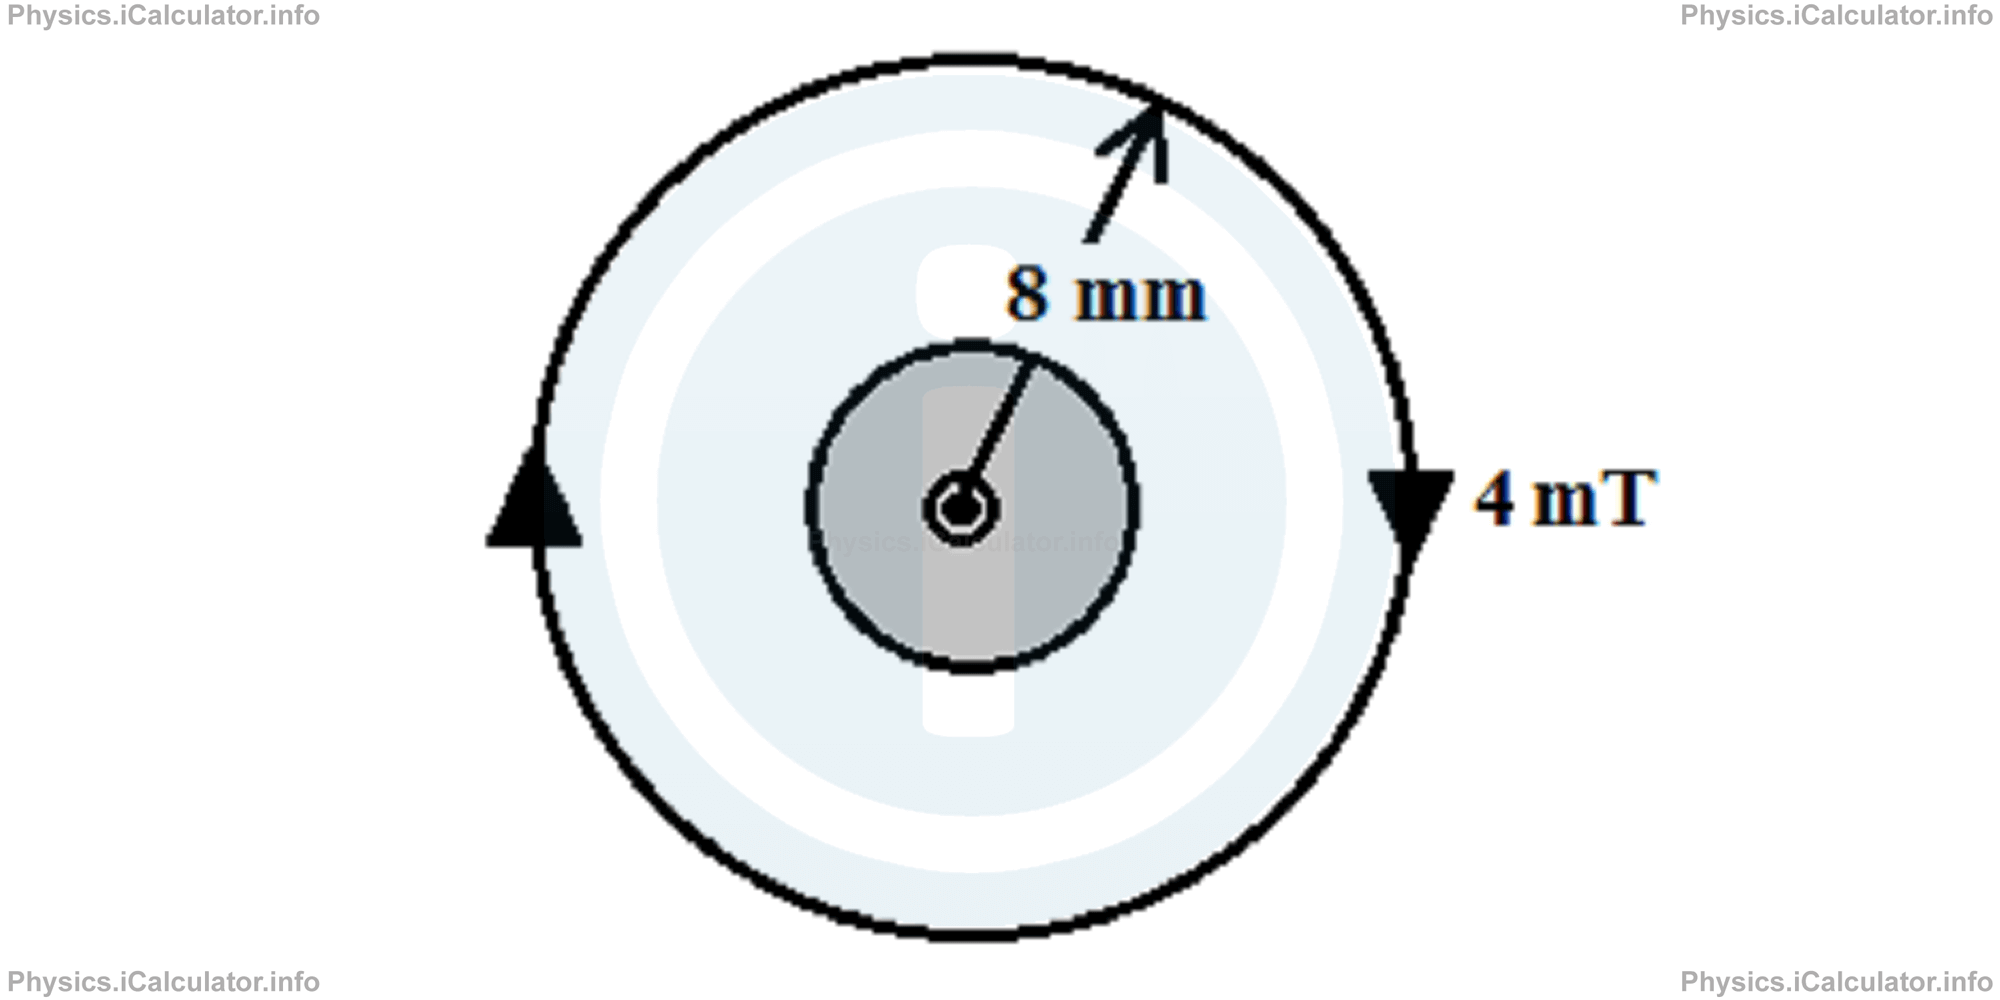 Physics Tutorials: This image provides visual information for the physics tutorial Ampere's Law 